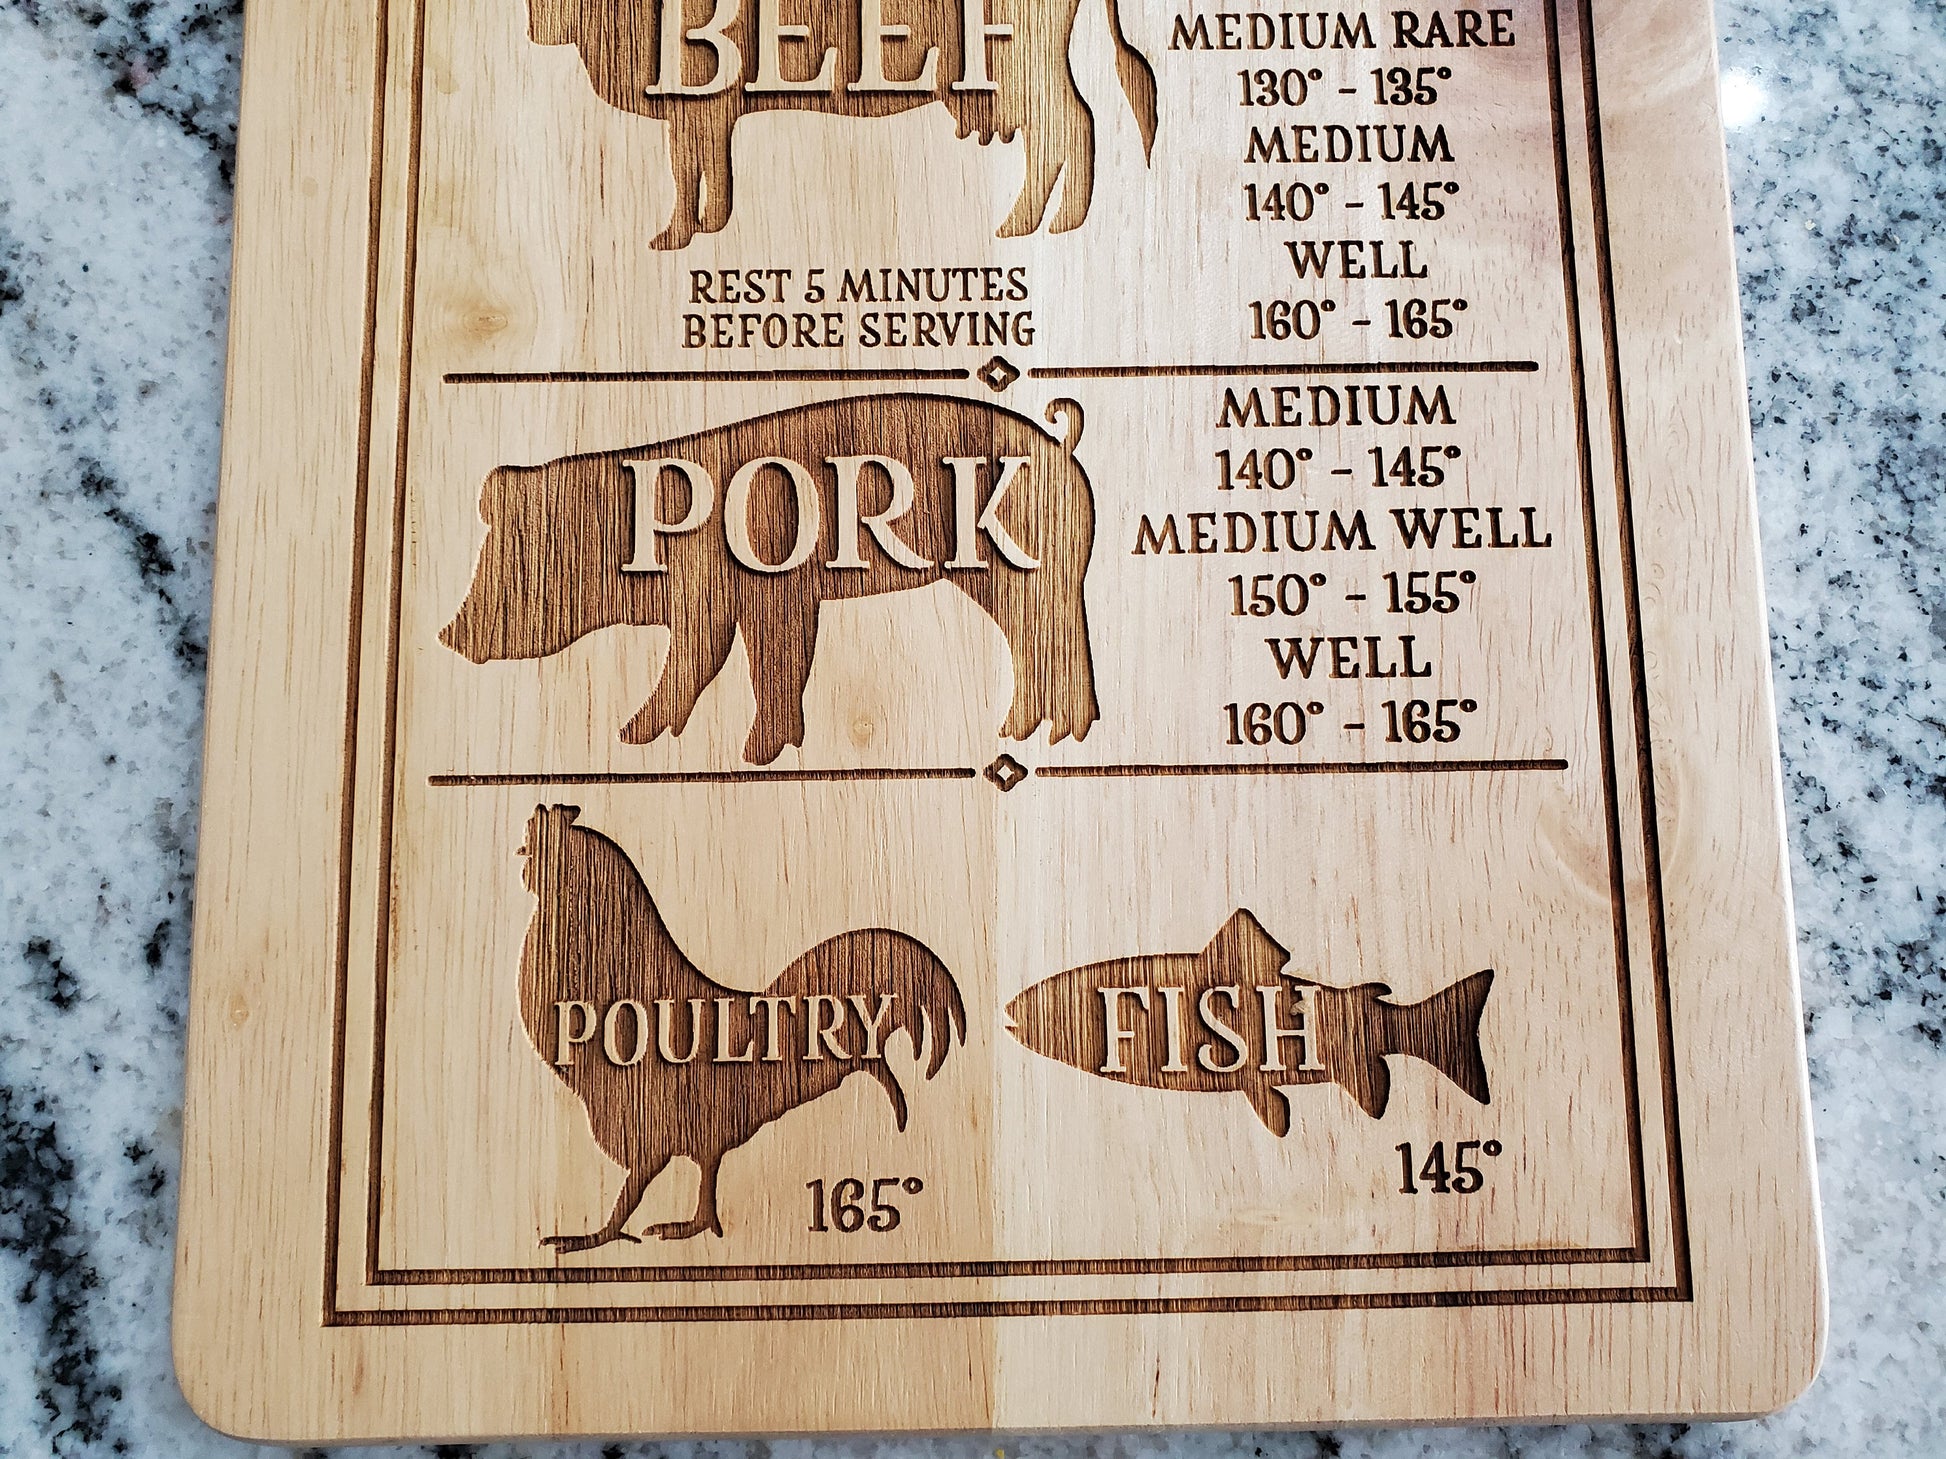 Cooking Time and Temperature For Beef Fish Pork Chicken Measurement Hardwood Engraved Cutting Board Wood Kitchen Accessory Animals Chart